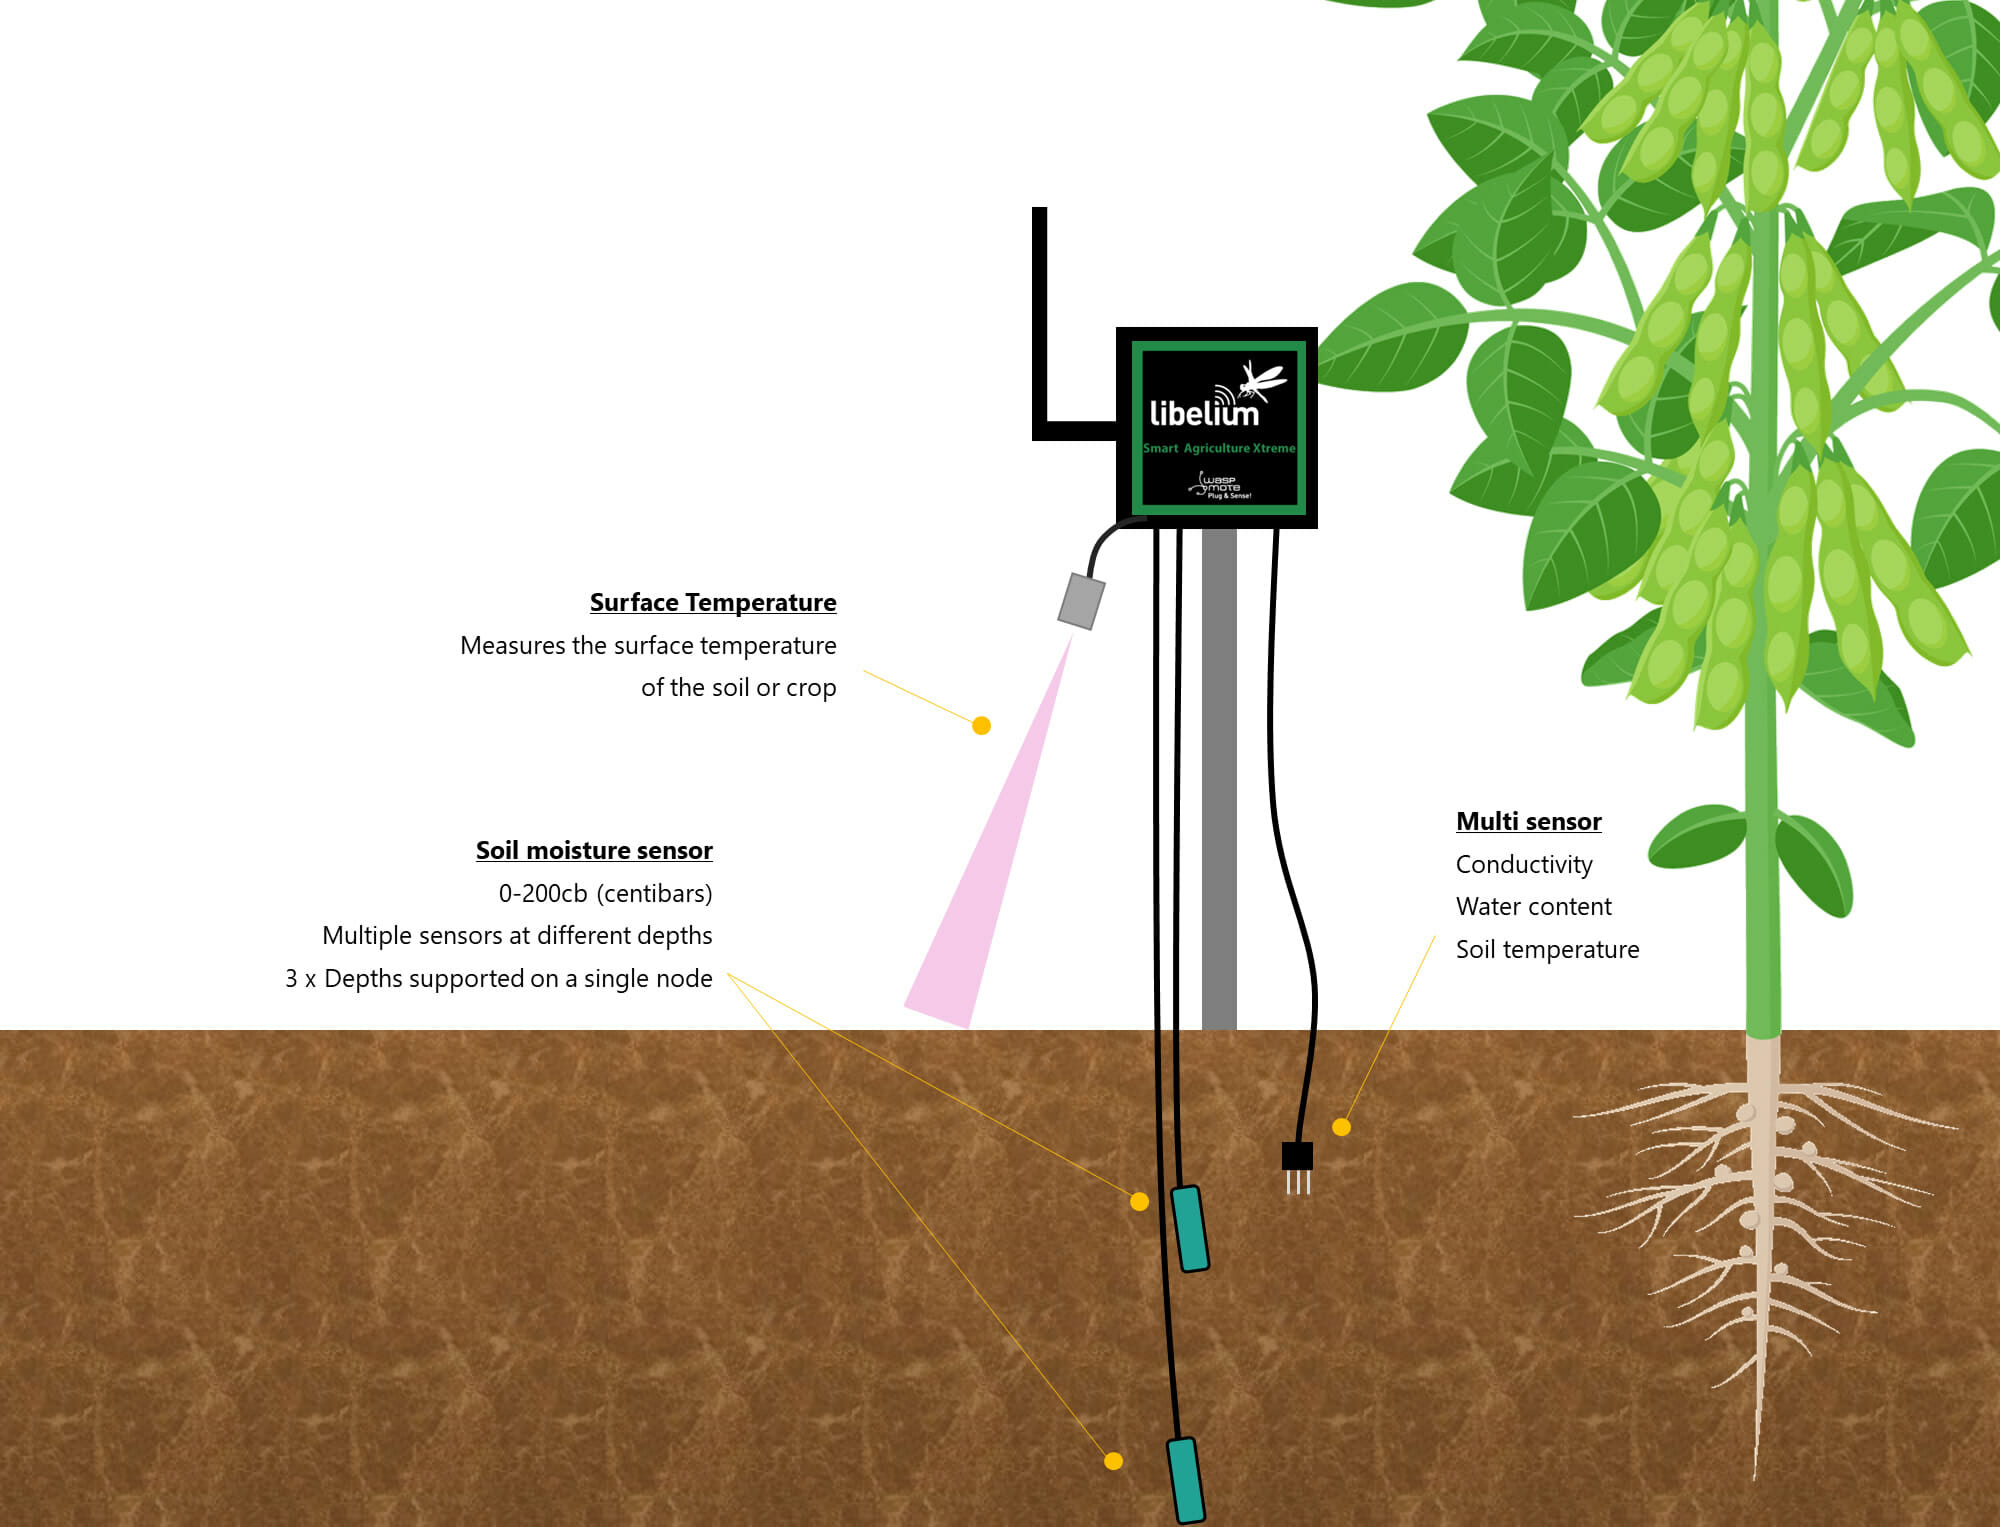 Soil Monitoring with IoT - Smart Agriculture : Manx Technology Group